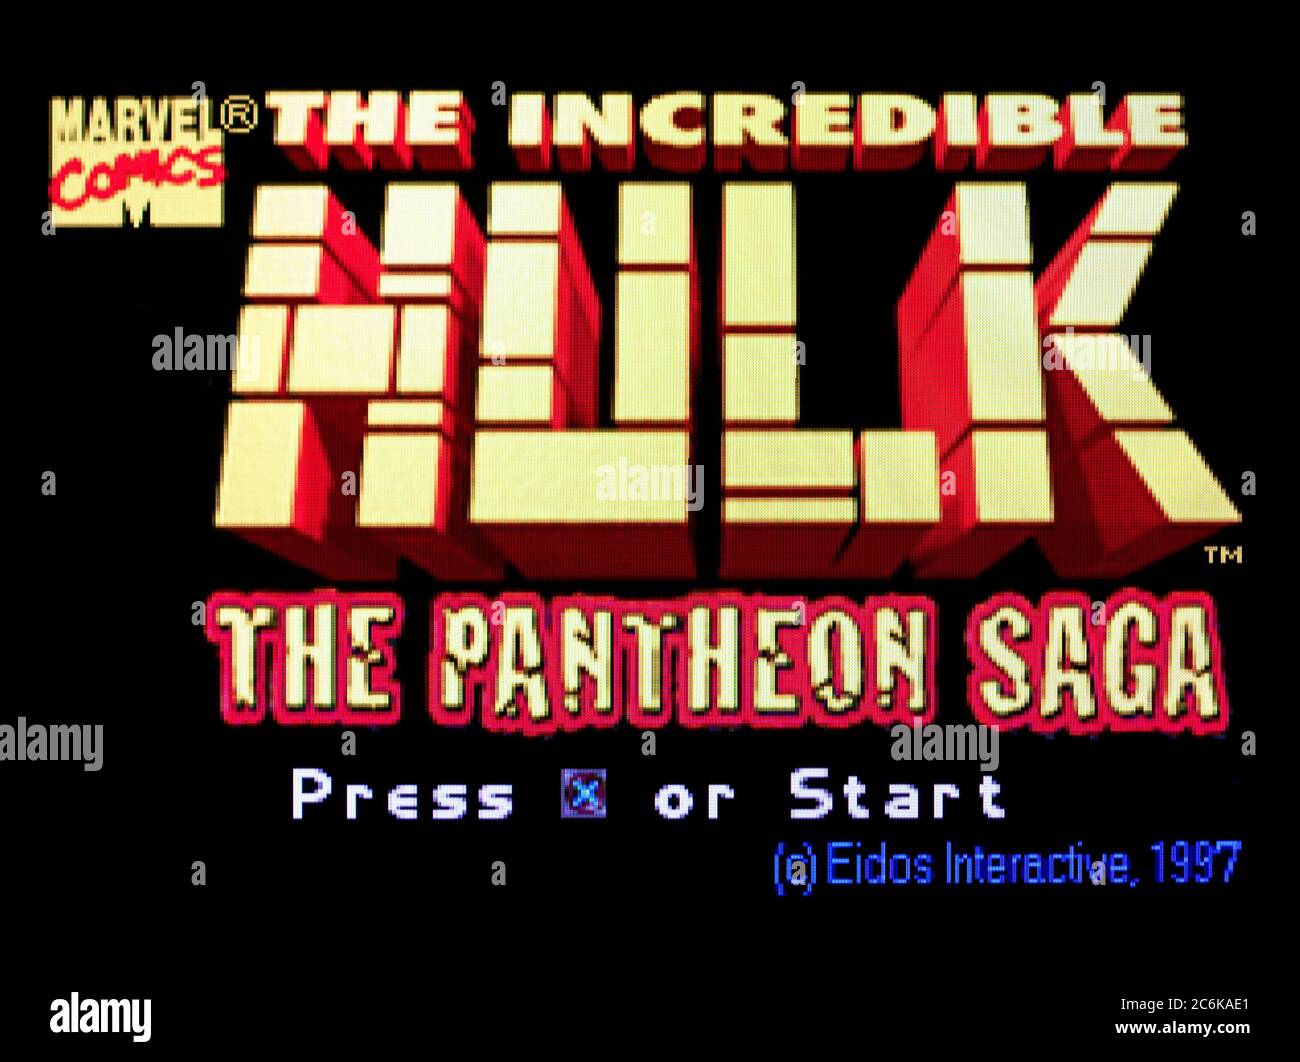 The Incredible Hulk Pantheon Saga - Sony Playstation 1 PS1 PSX - Editorial use only Stock Photo